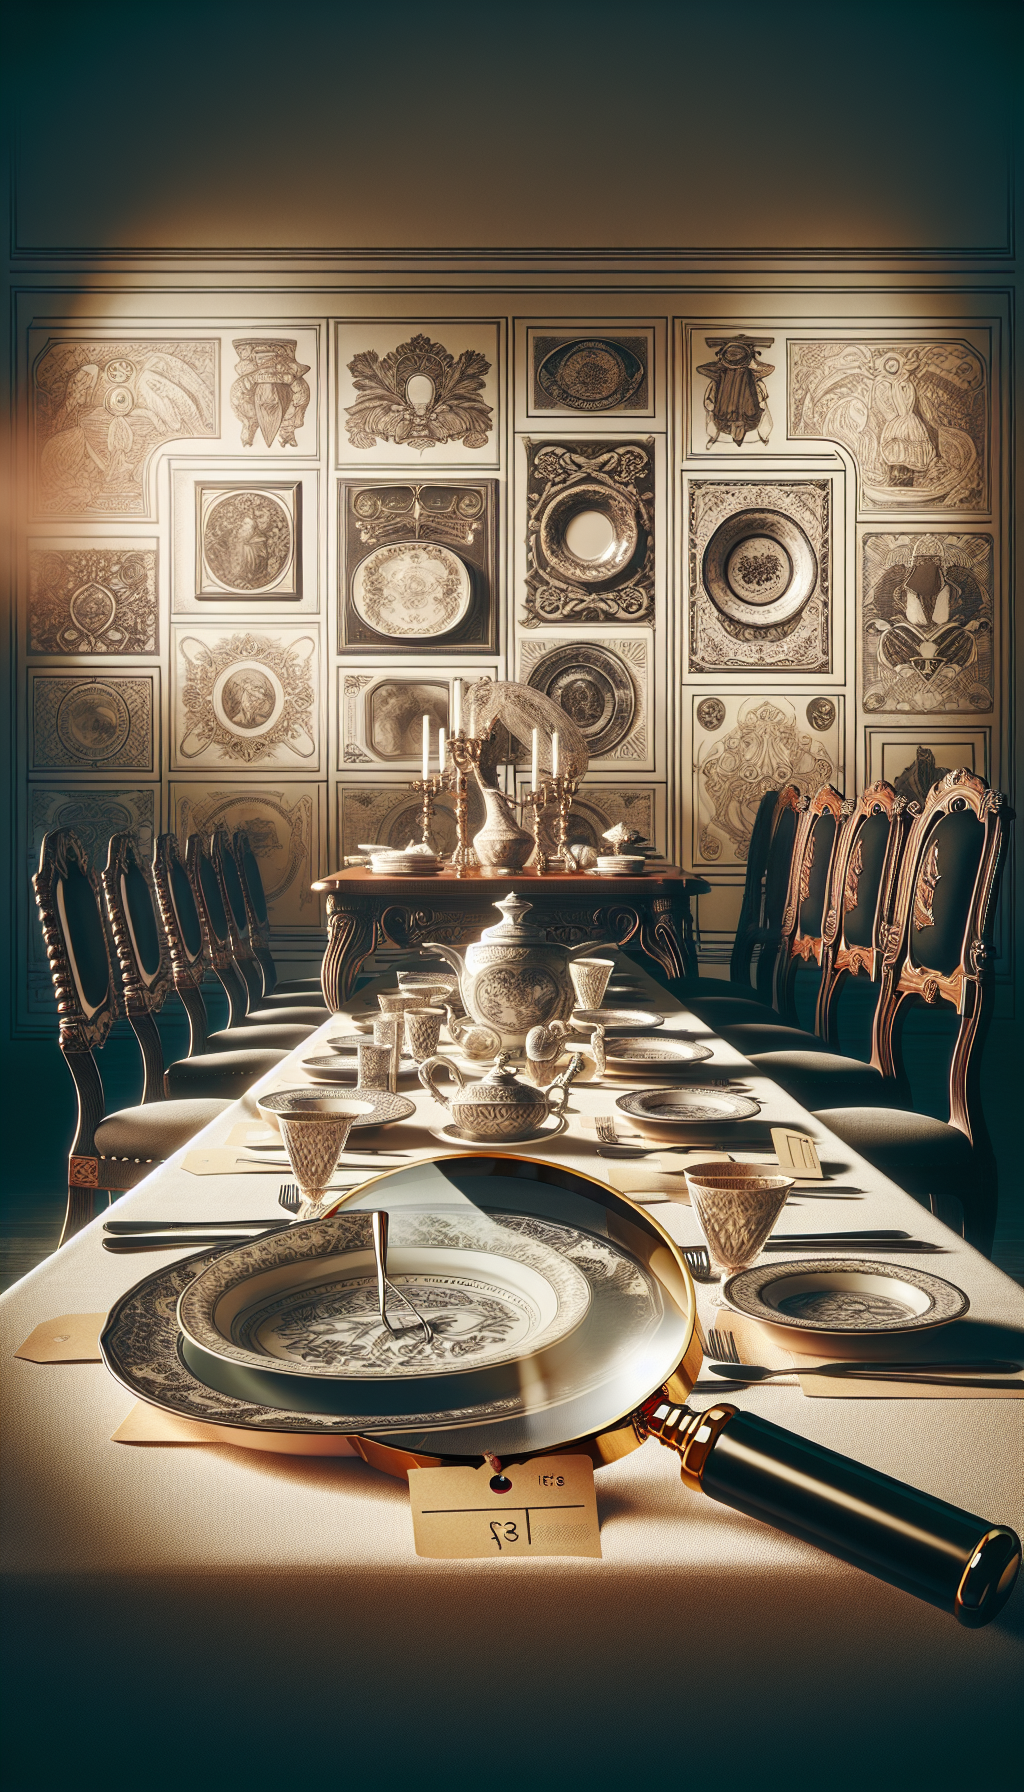 An ornate Victorian dining table set elegantly with lustrous antique dishes, each with a delicate tag indicating its era and value. The background shifts in style, from baroque to art deco, subtly highlighting various historical periods. At the forefront, a magnifying glass hovers over a dish, with a shimmering price visible as if appraised through the lens of time.